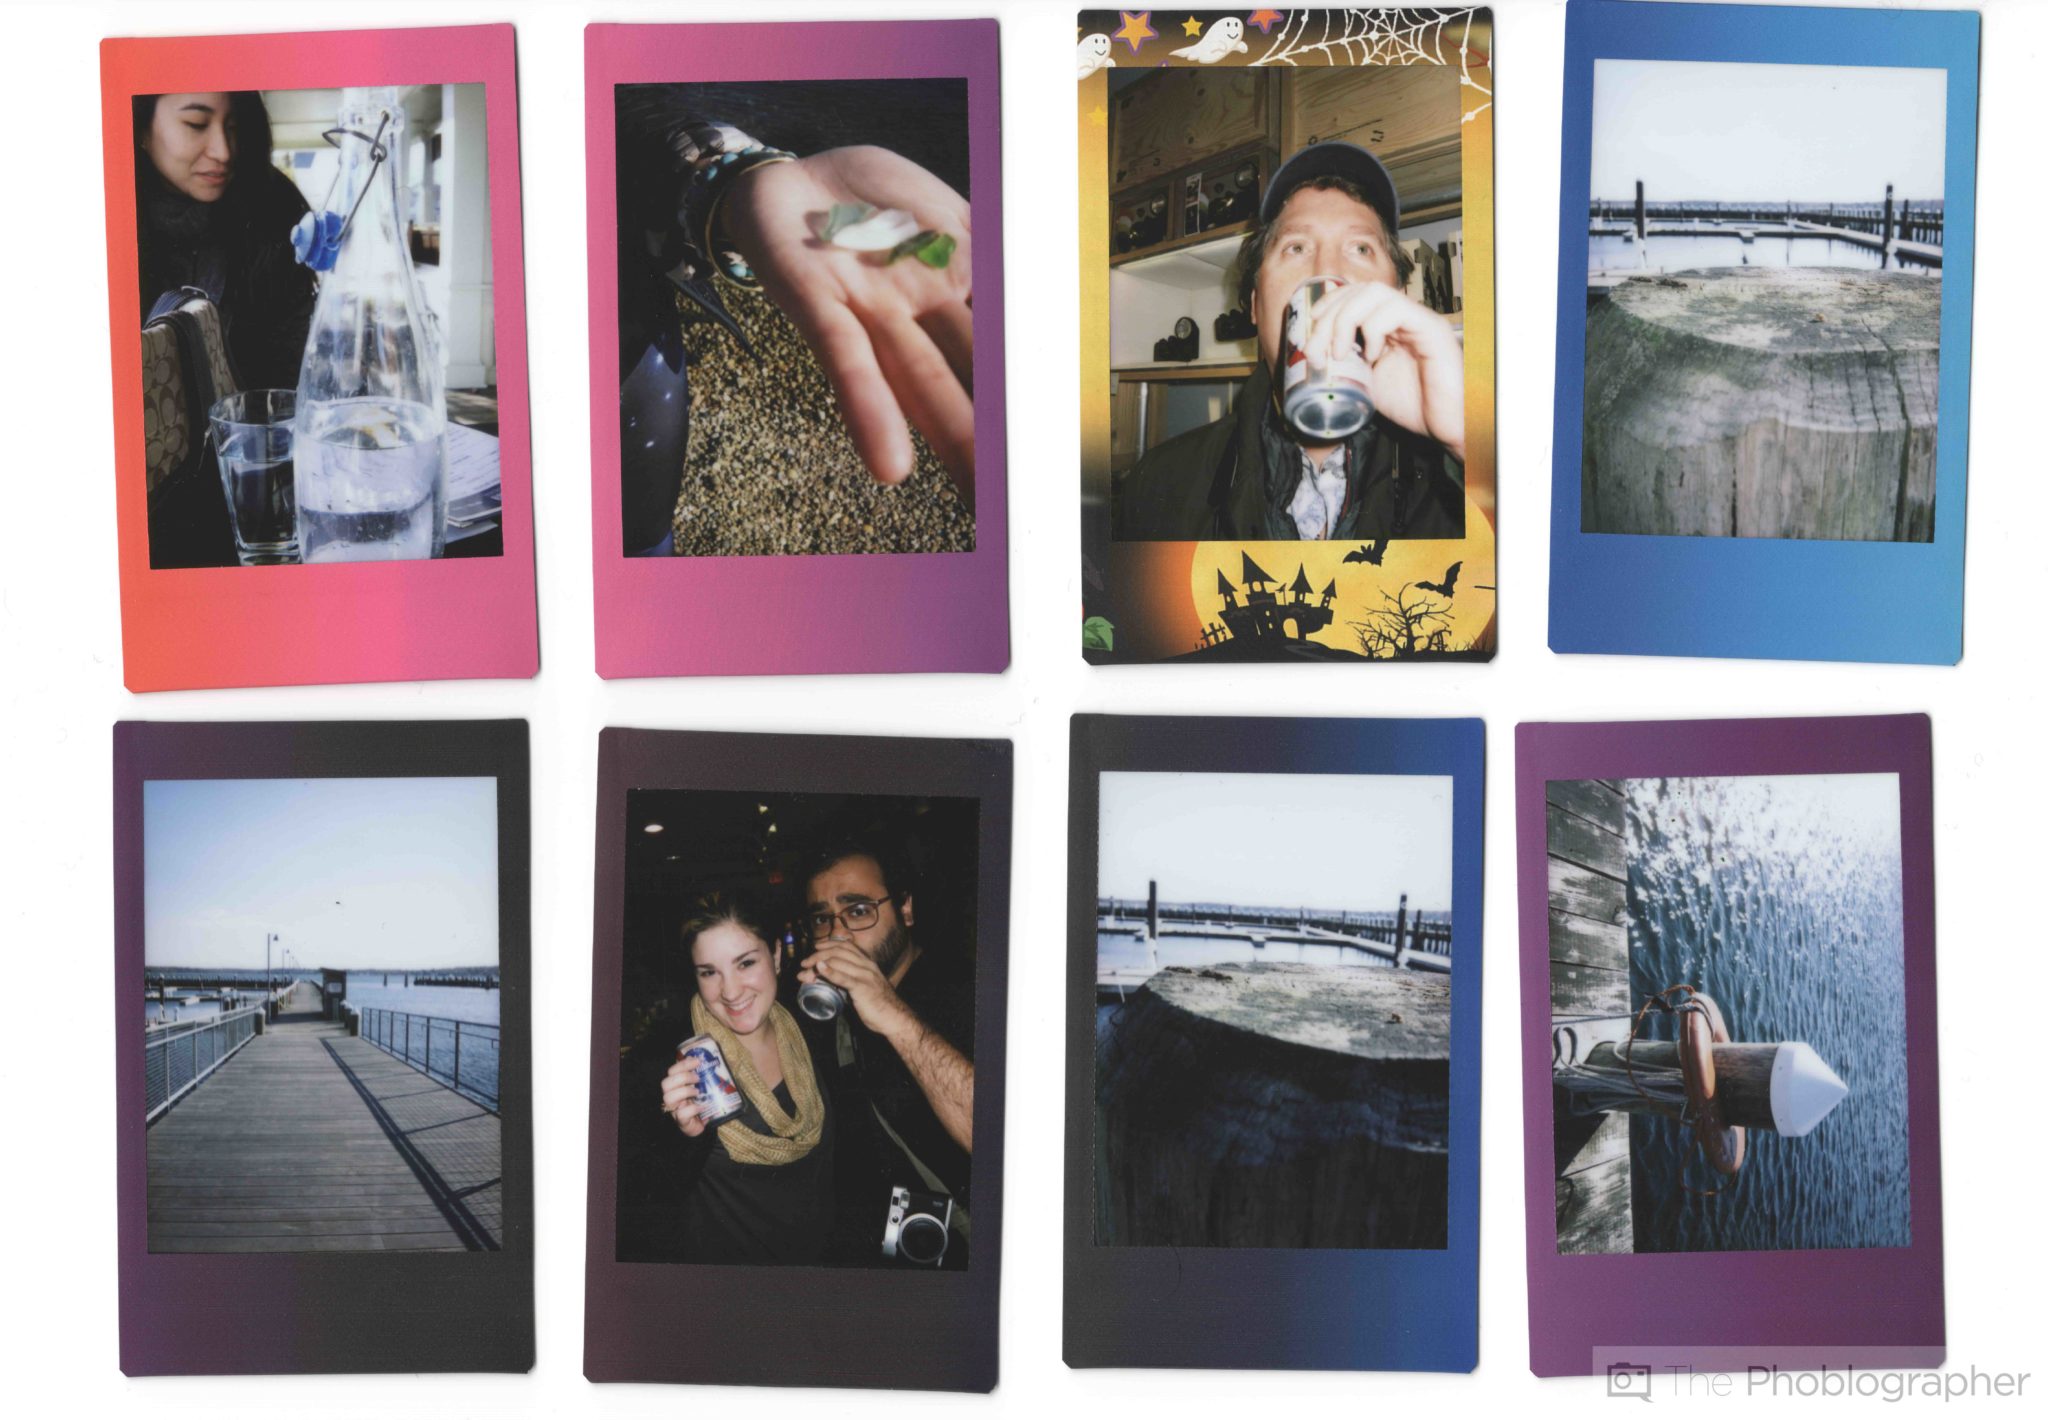 How to Take Selfies with the Instax Mini 90